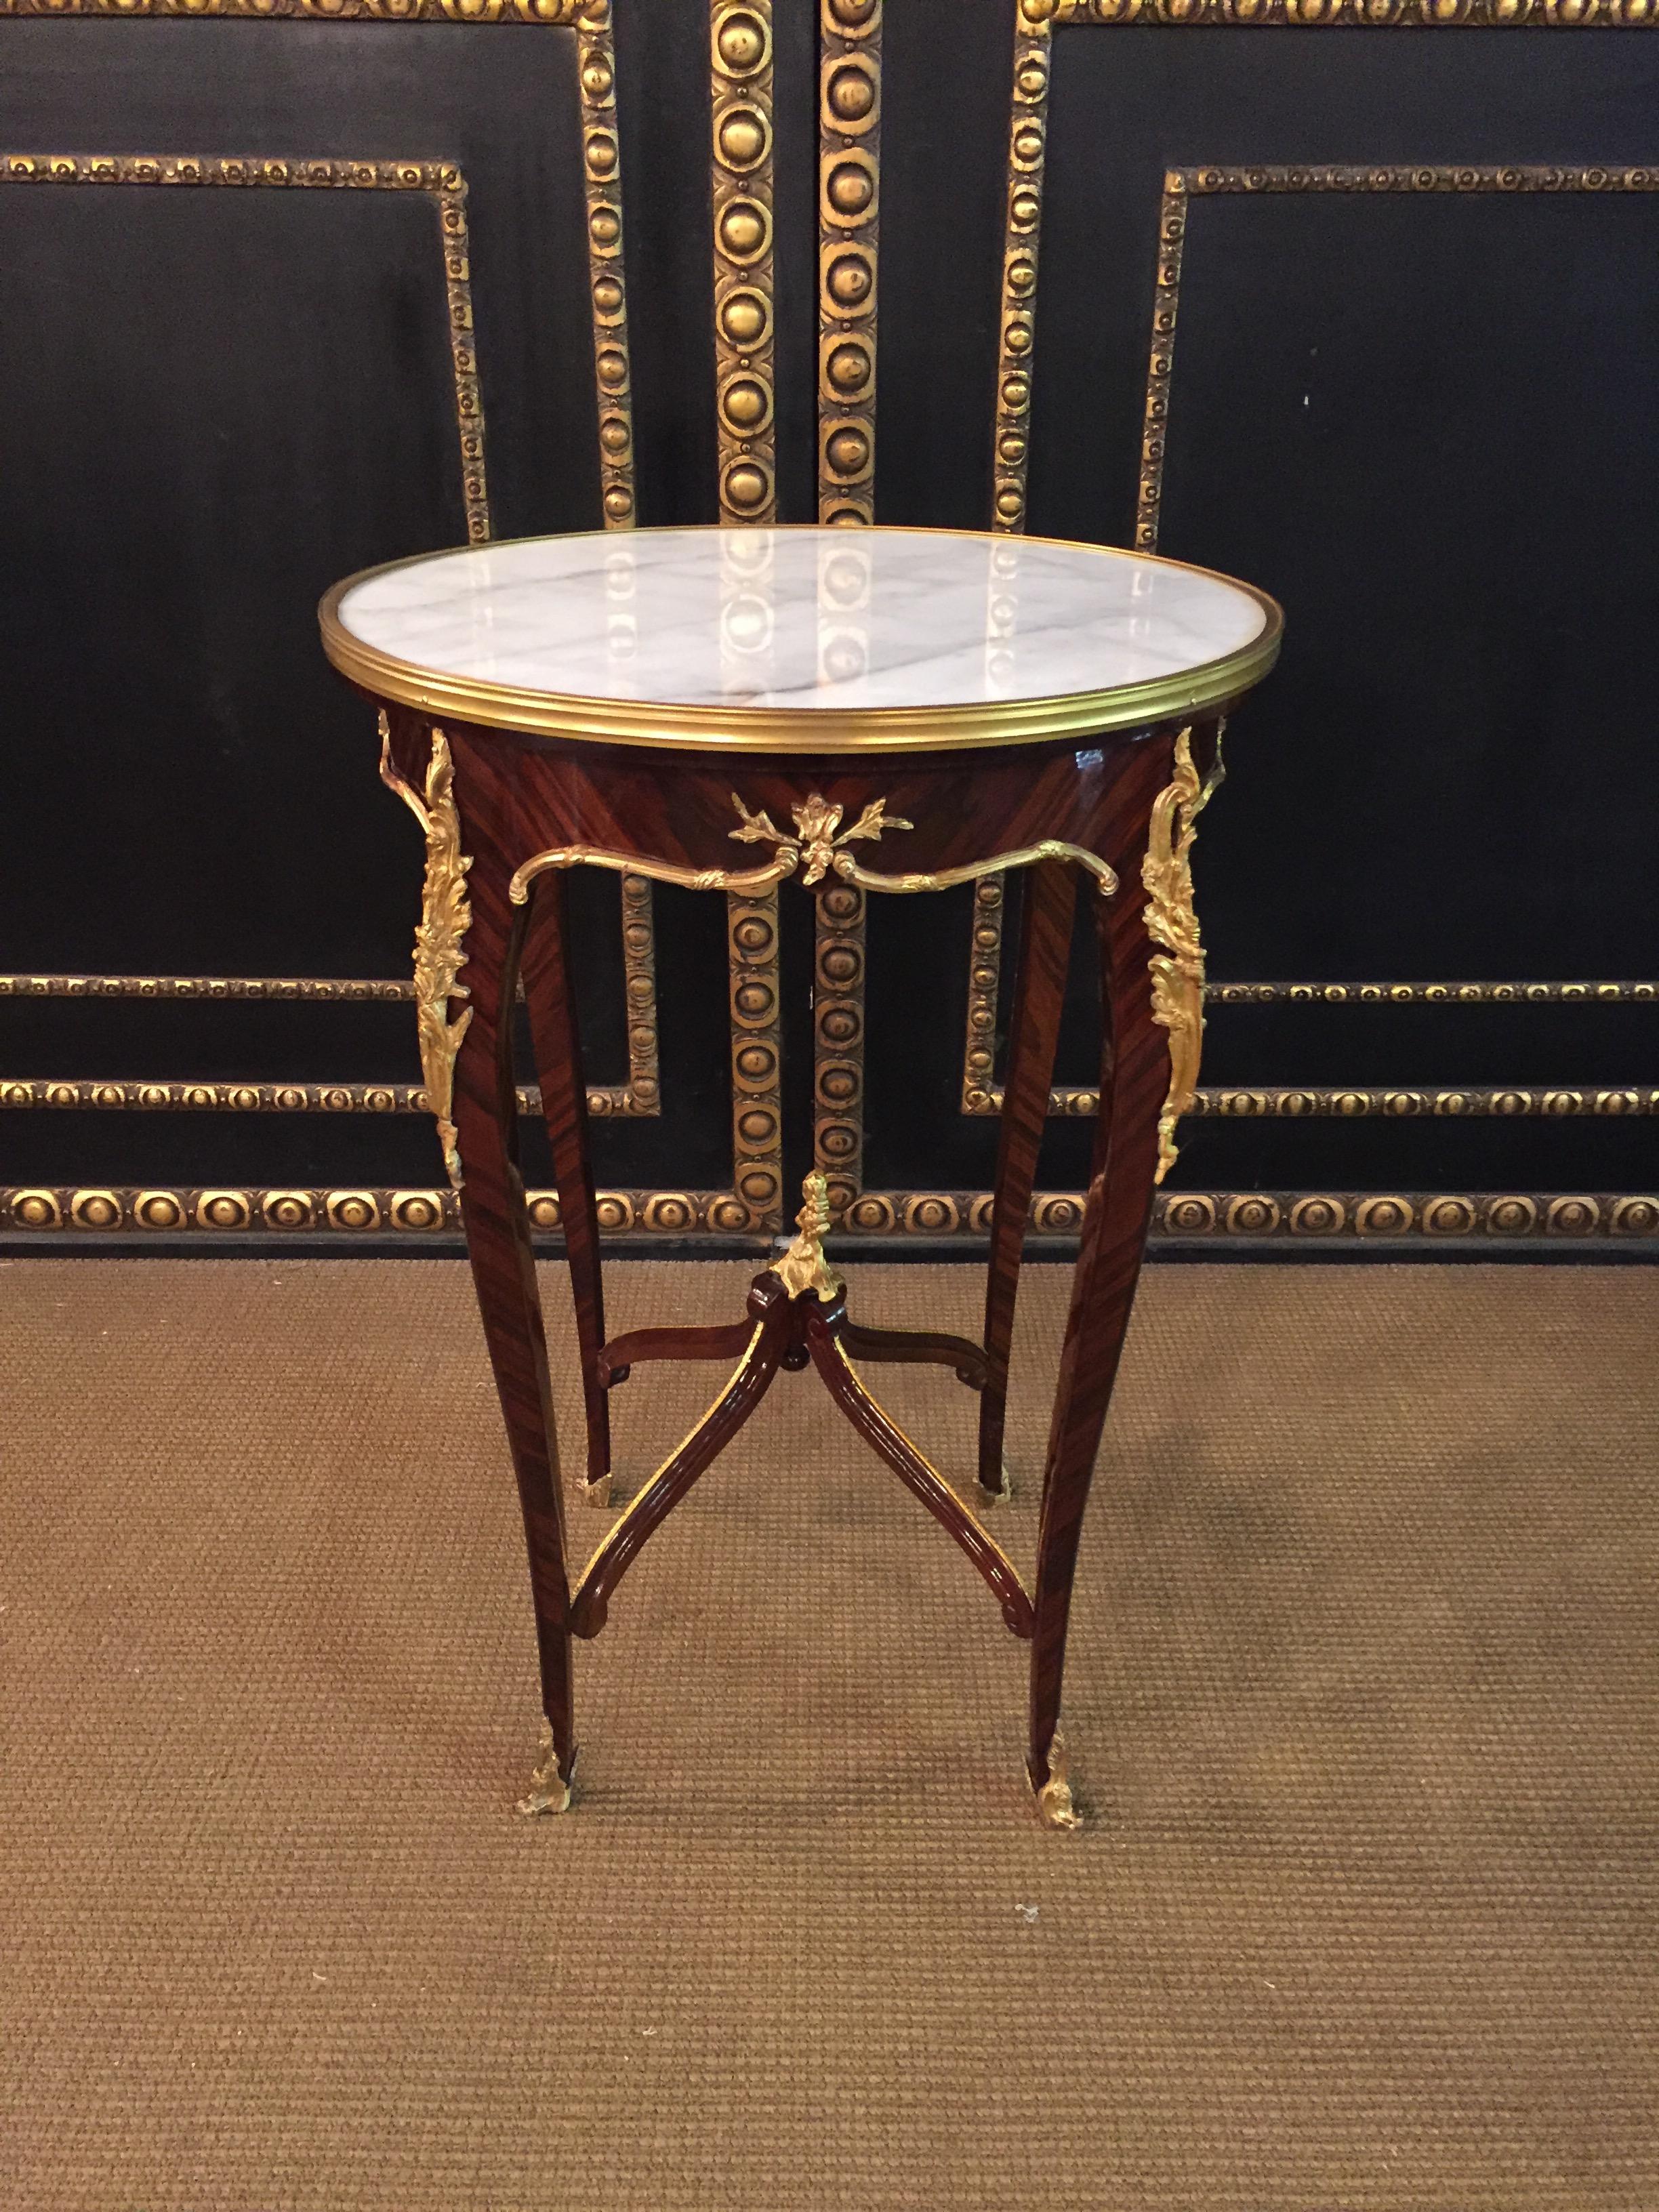 20th century French salon side table in Louis Quinze with white marblea mahogany of solid wood side table in Louis XV style slightly convex and concave, carcass, flanked by solid corner glaciers on high, elegantly curved legs, connected below by a